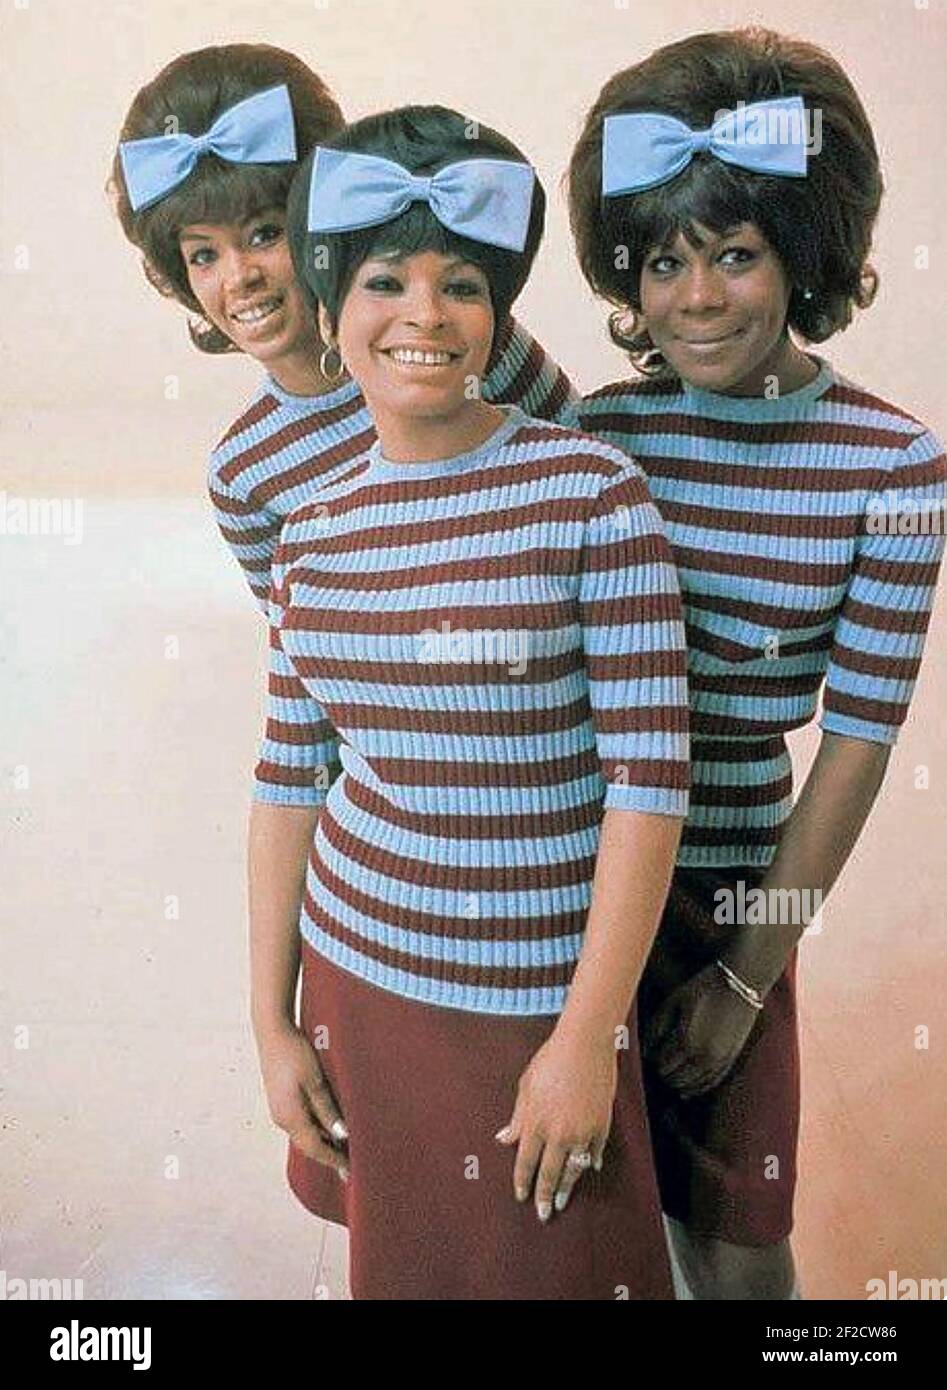 THE MARVELETTES Promotional photo of American vocal group about 1966 with from left: Katherine Anderson, Wanda Young, Gladys Horton. Stock Photo